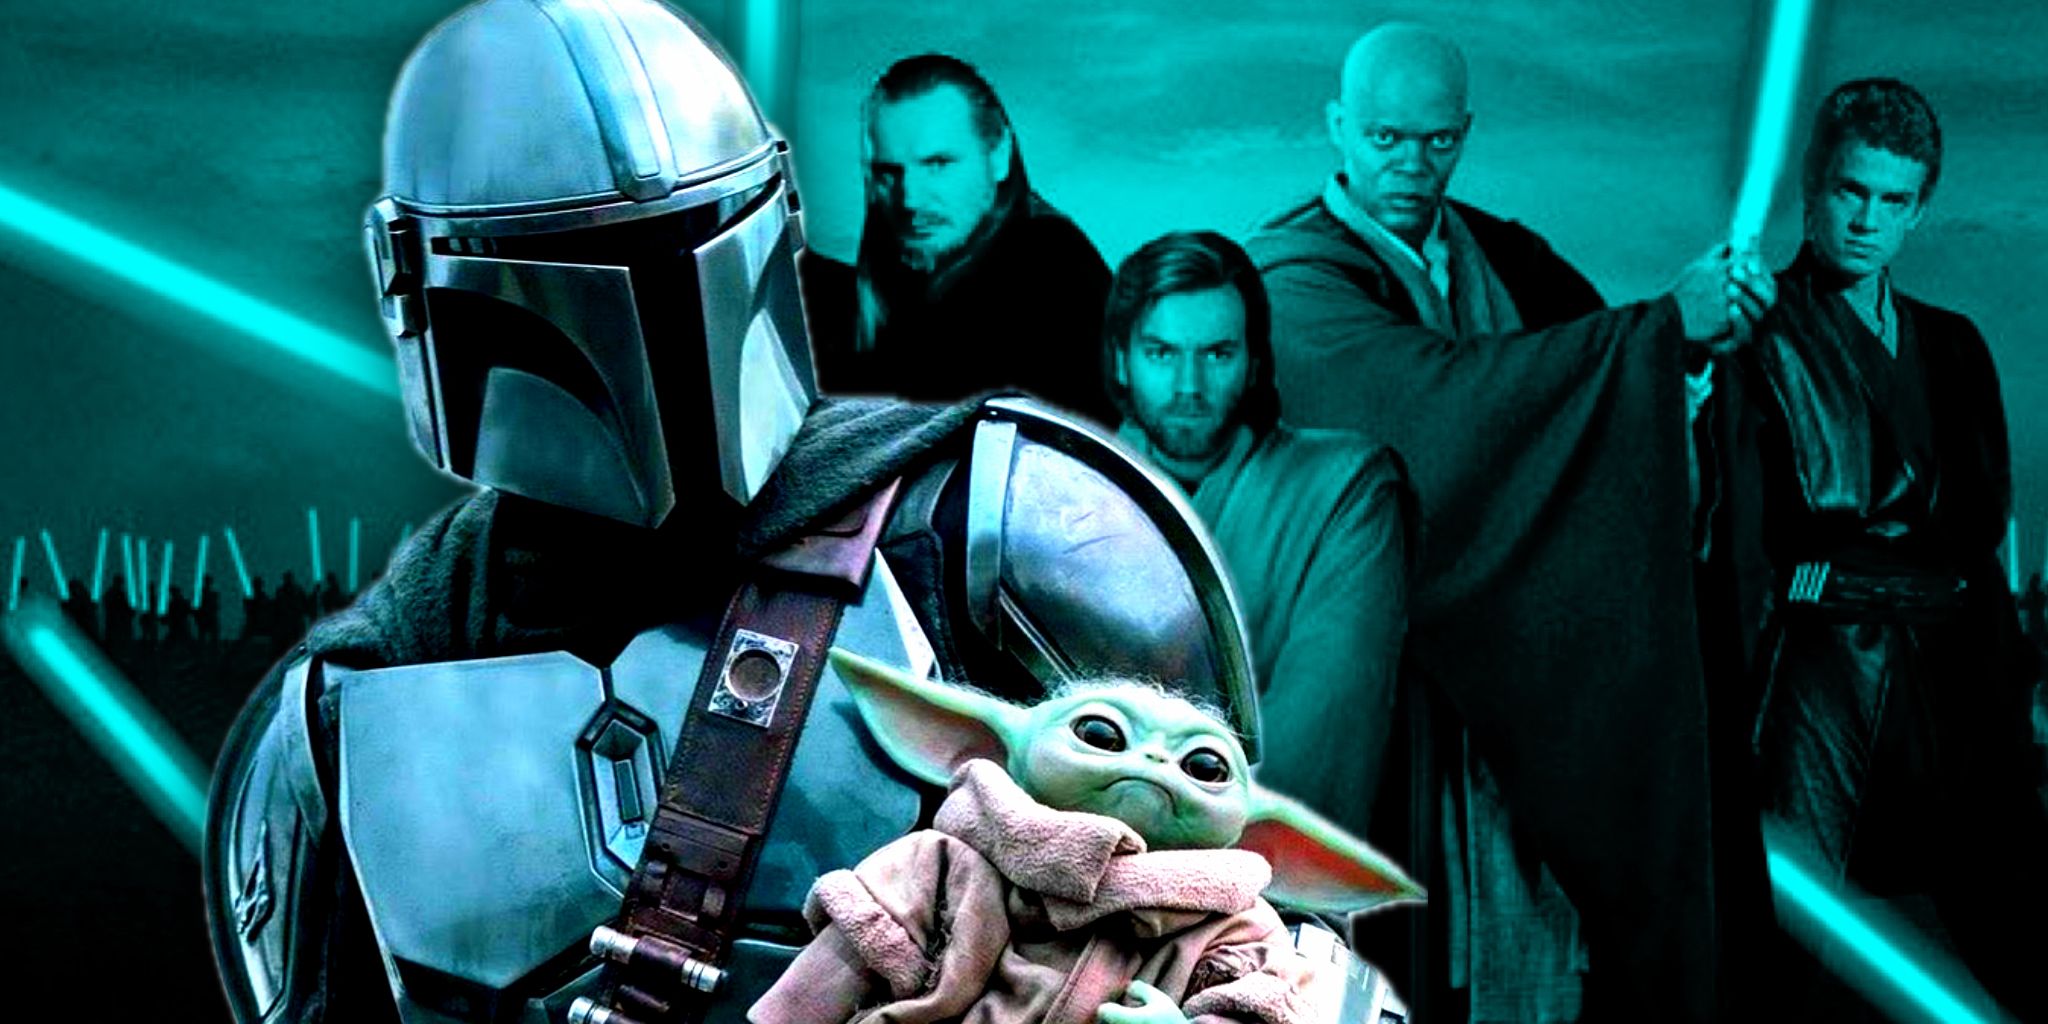 Din Djarin and Grogu in The Mandalorian season 2 superimposed over the Jedi of the prequel Star Wars trilogy